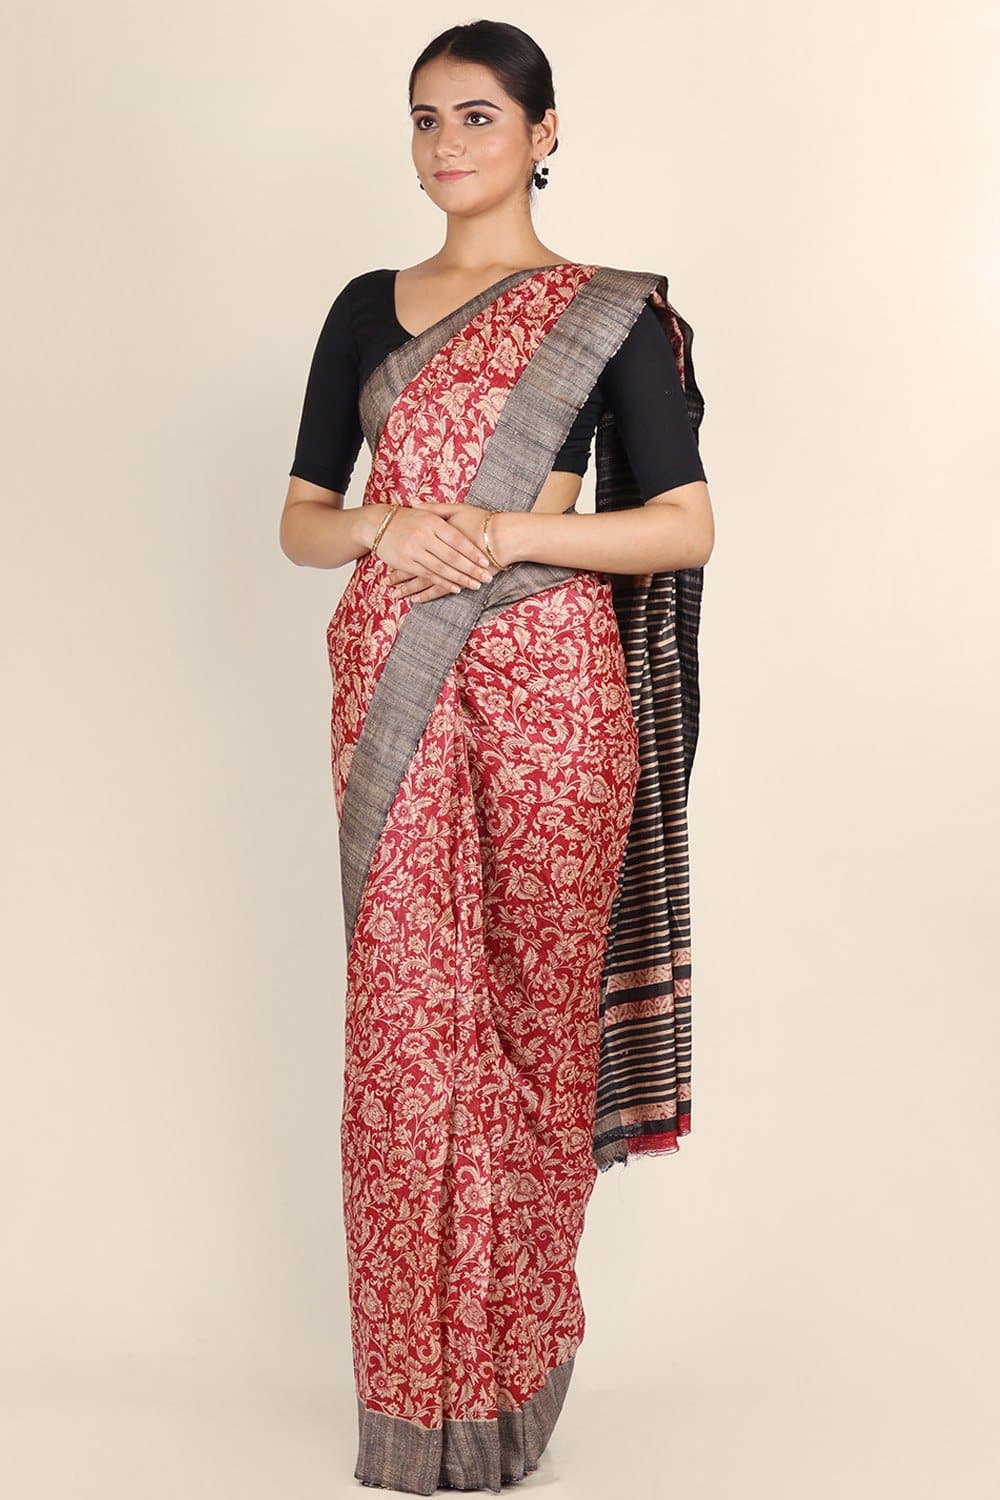 Kosa Silk Tussar Tie & Dye Handloom Saree, 6.5 m (with blouse piece) at Rs  6500 in Champa